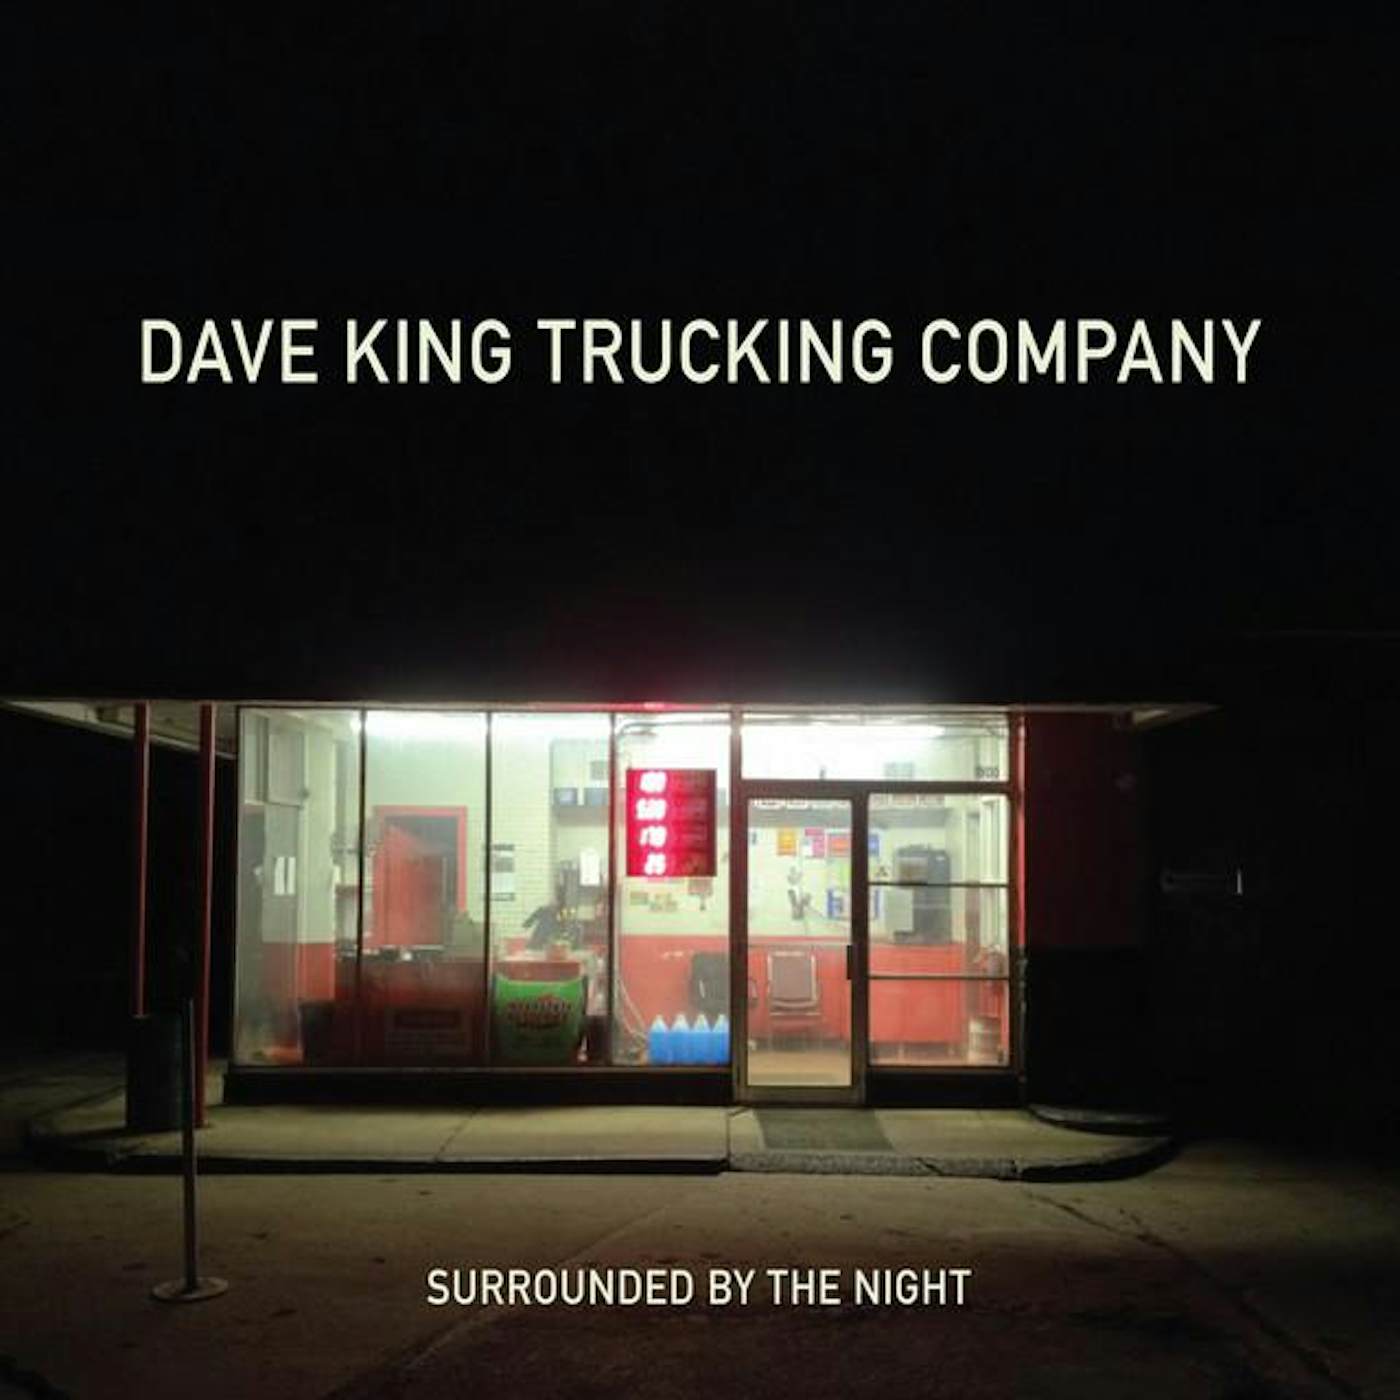 Dave King Trucking Company